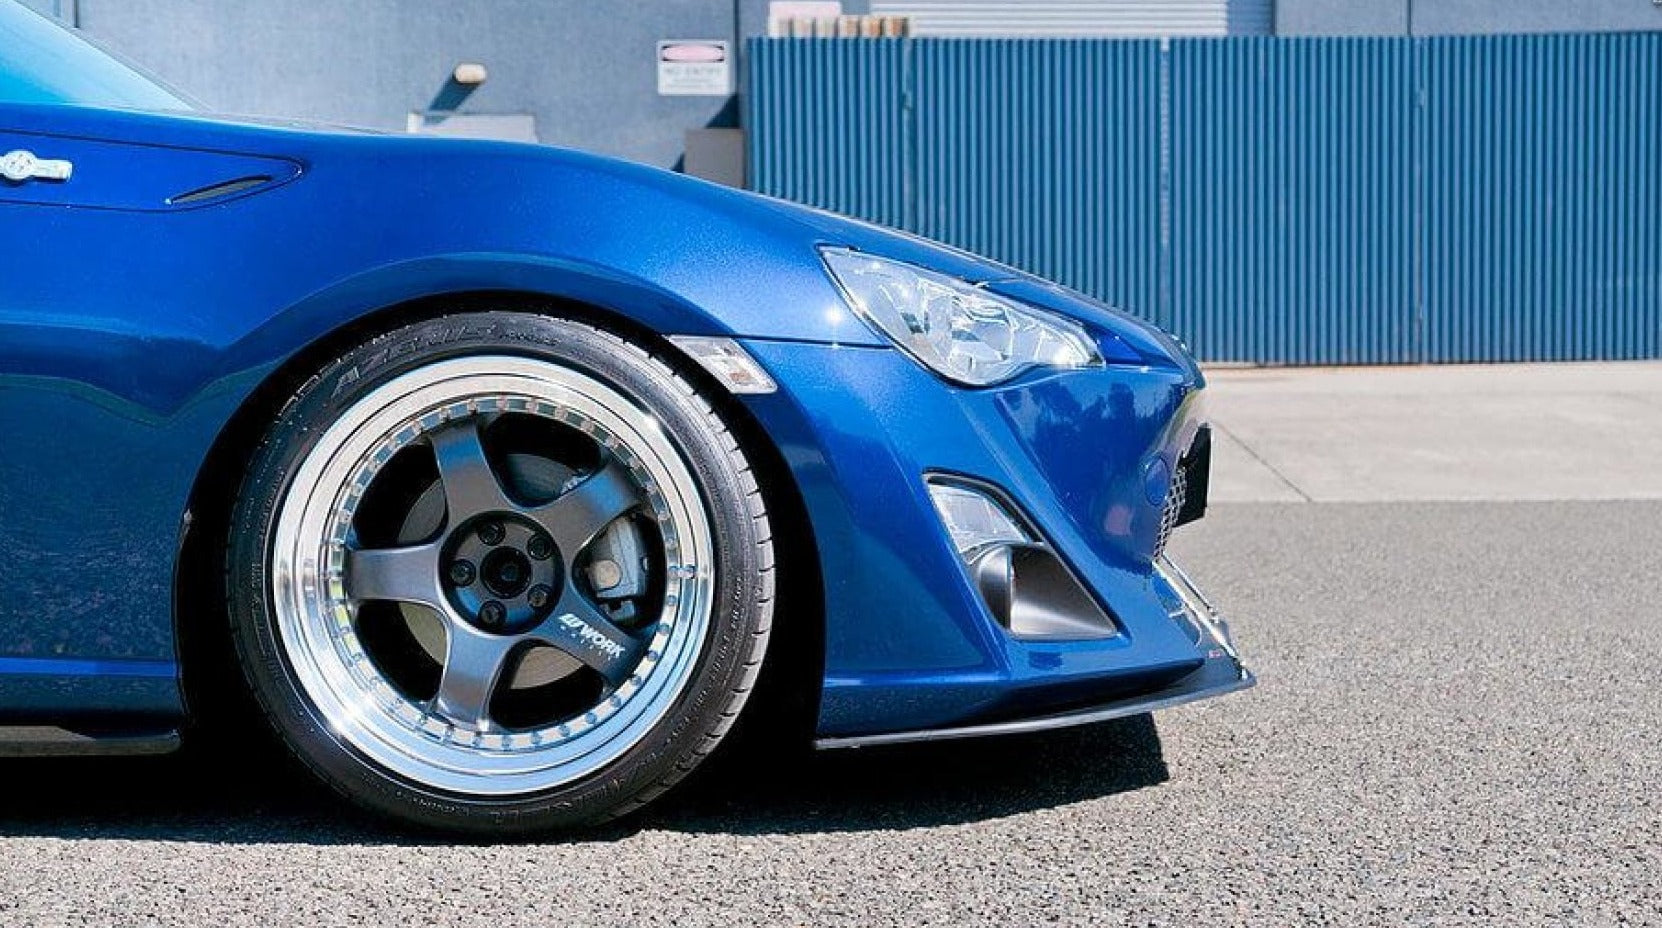 Toyota 86 (GT86/FT86) Front Lip Splitter V2 (With Support Rods) - MODE Auto Concepts